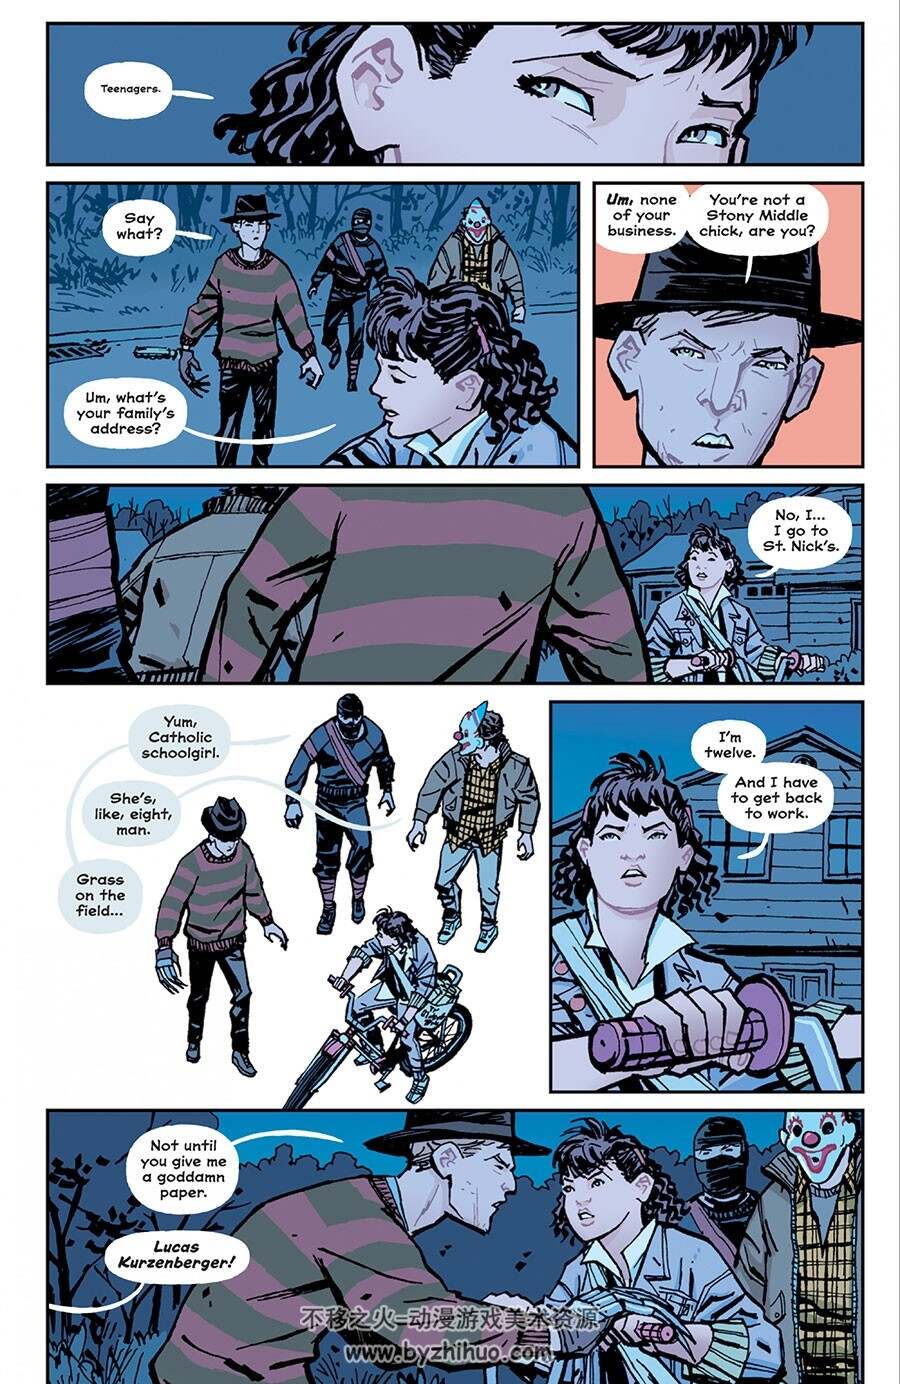 Paper Girls The Complete Story  Brian K. Vaughan & Cliff Chiang 漫画下载